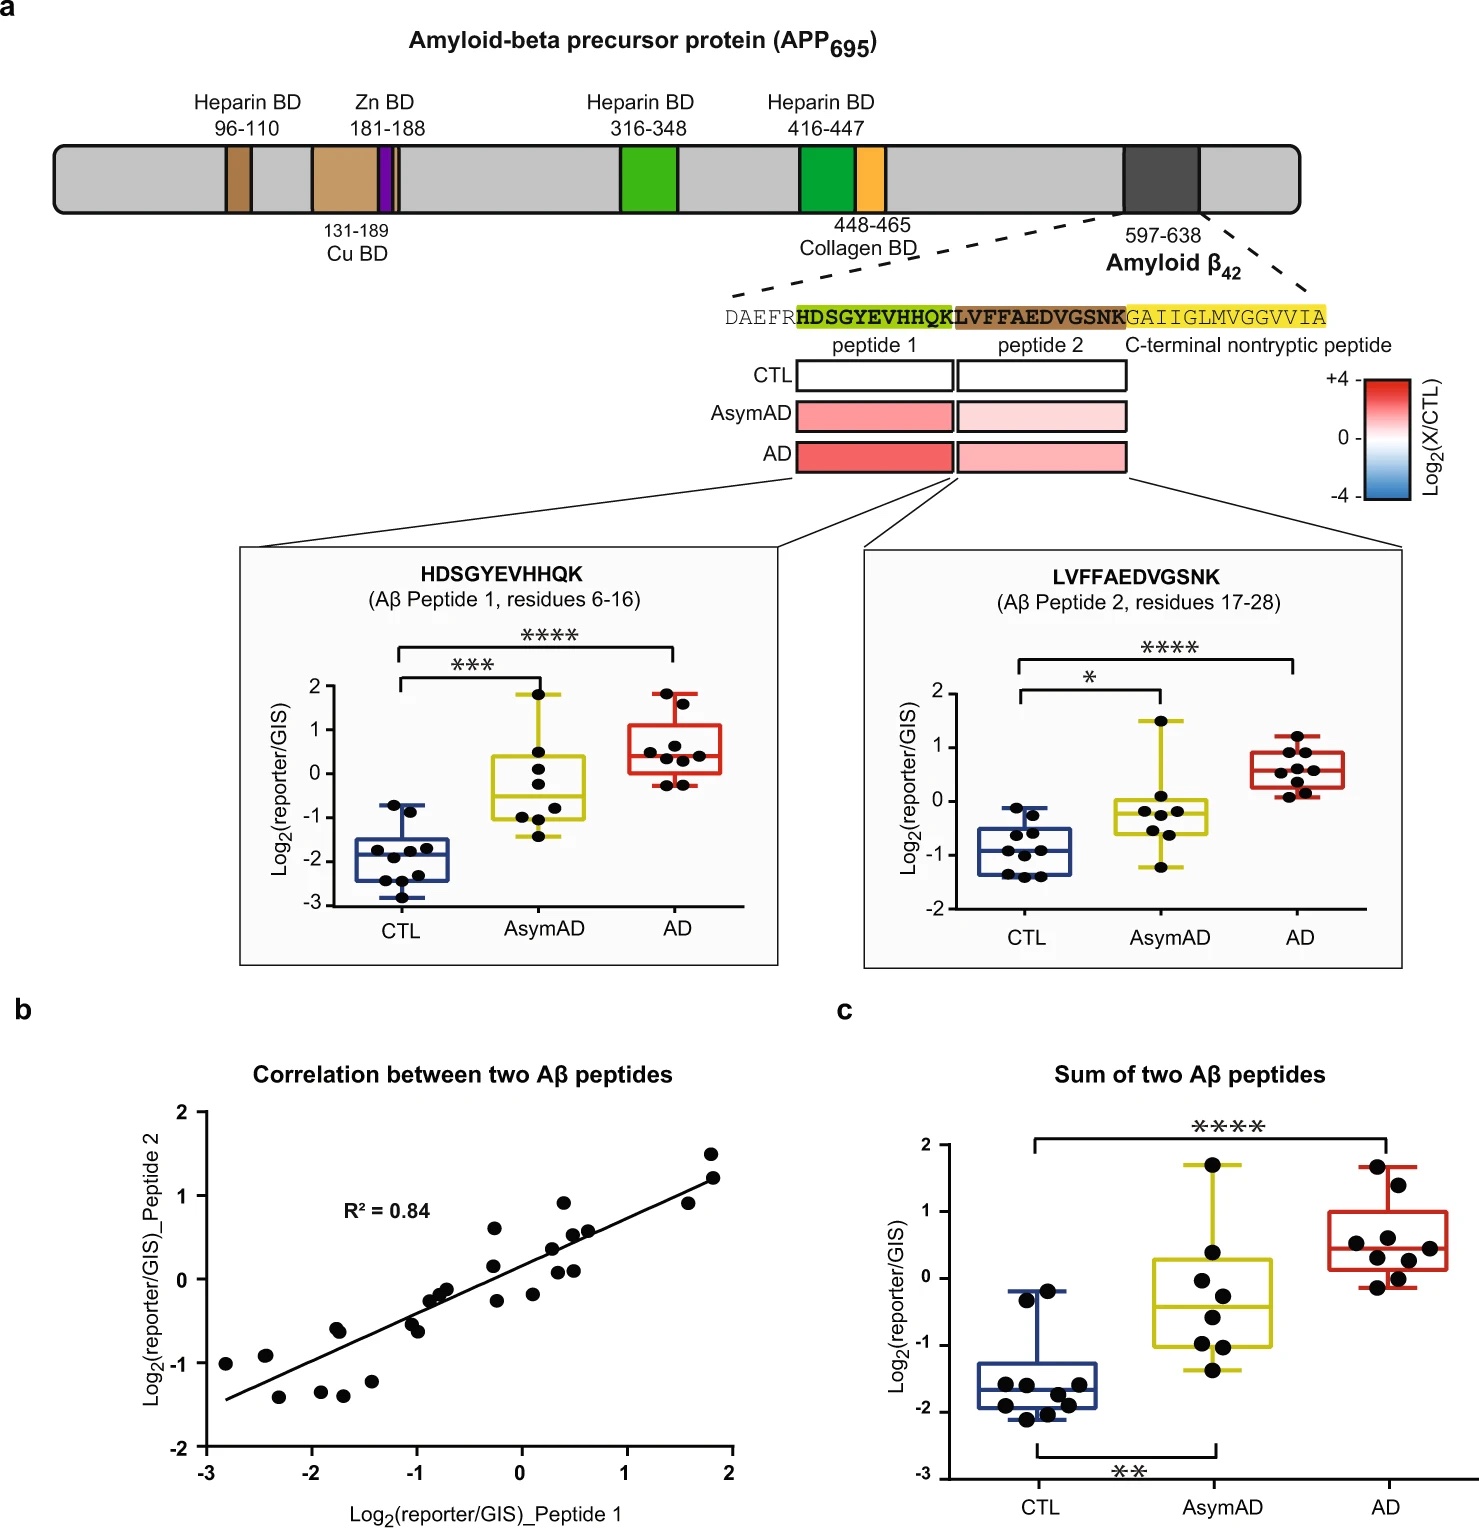 Global quantitative analysis of the human brain proteome and phosphoproteome in Alzheimer’s disease